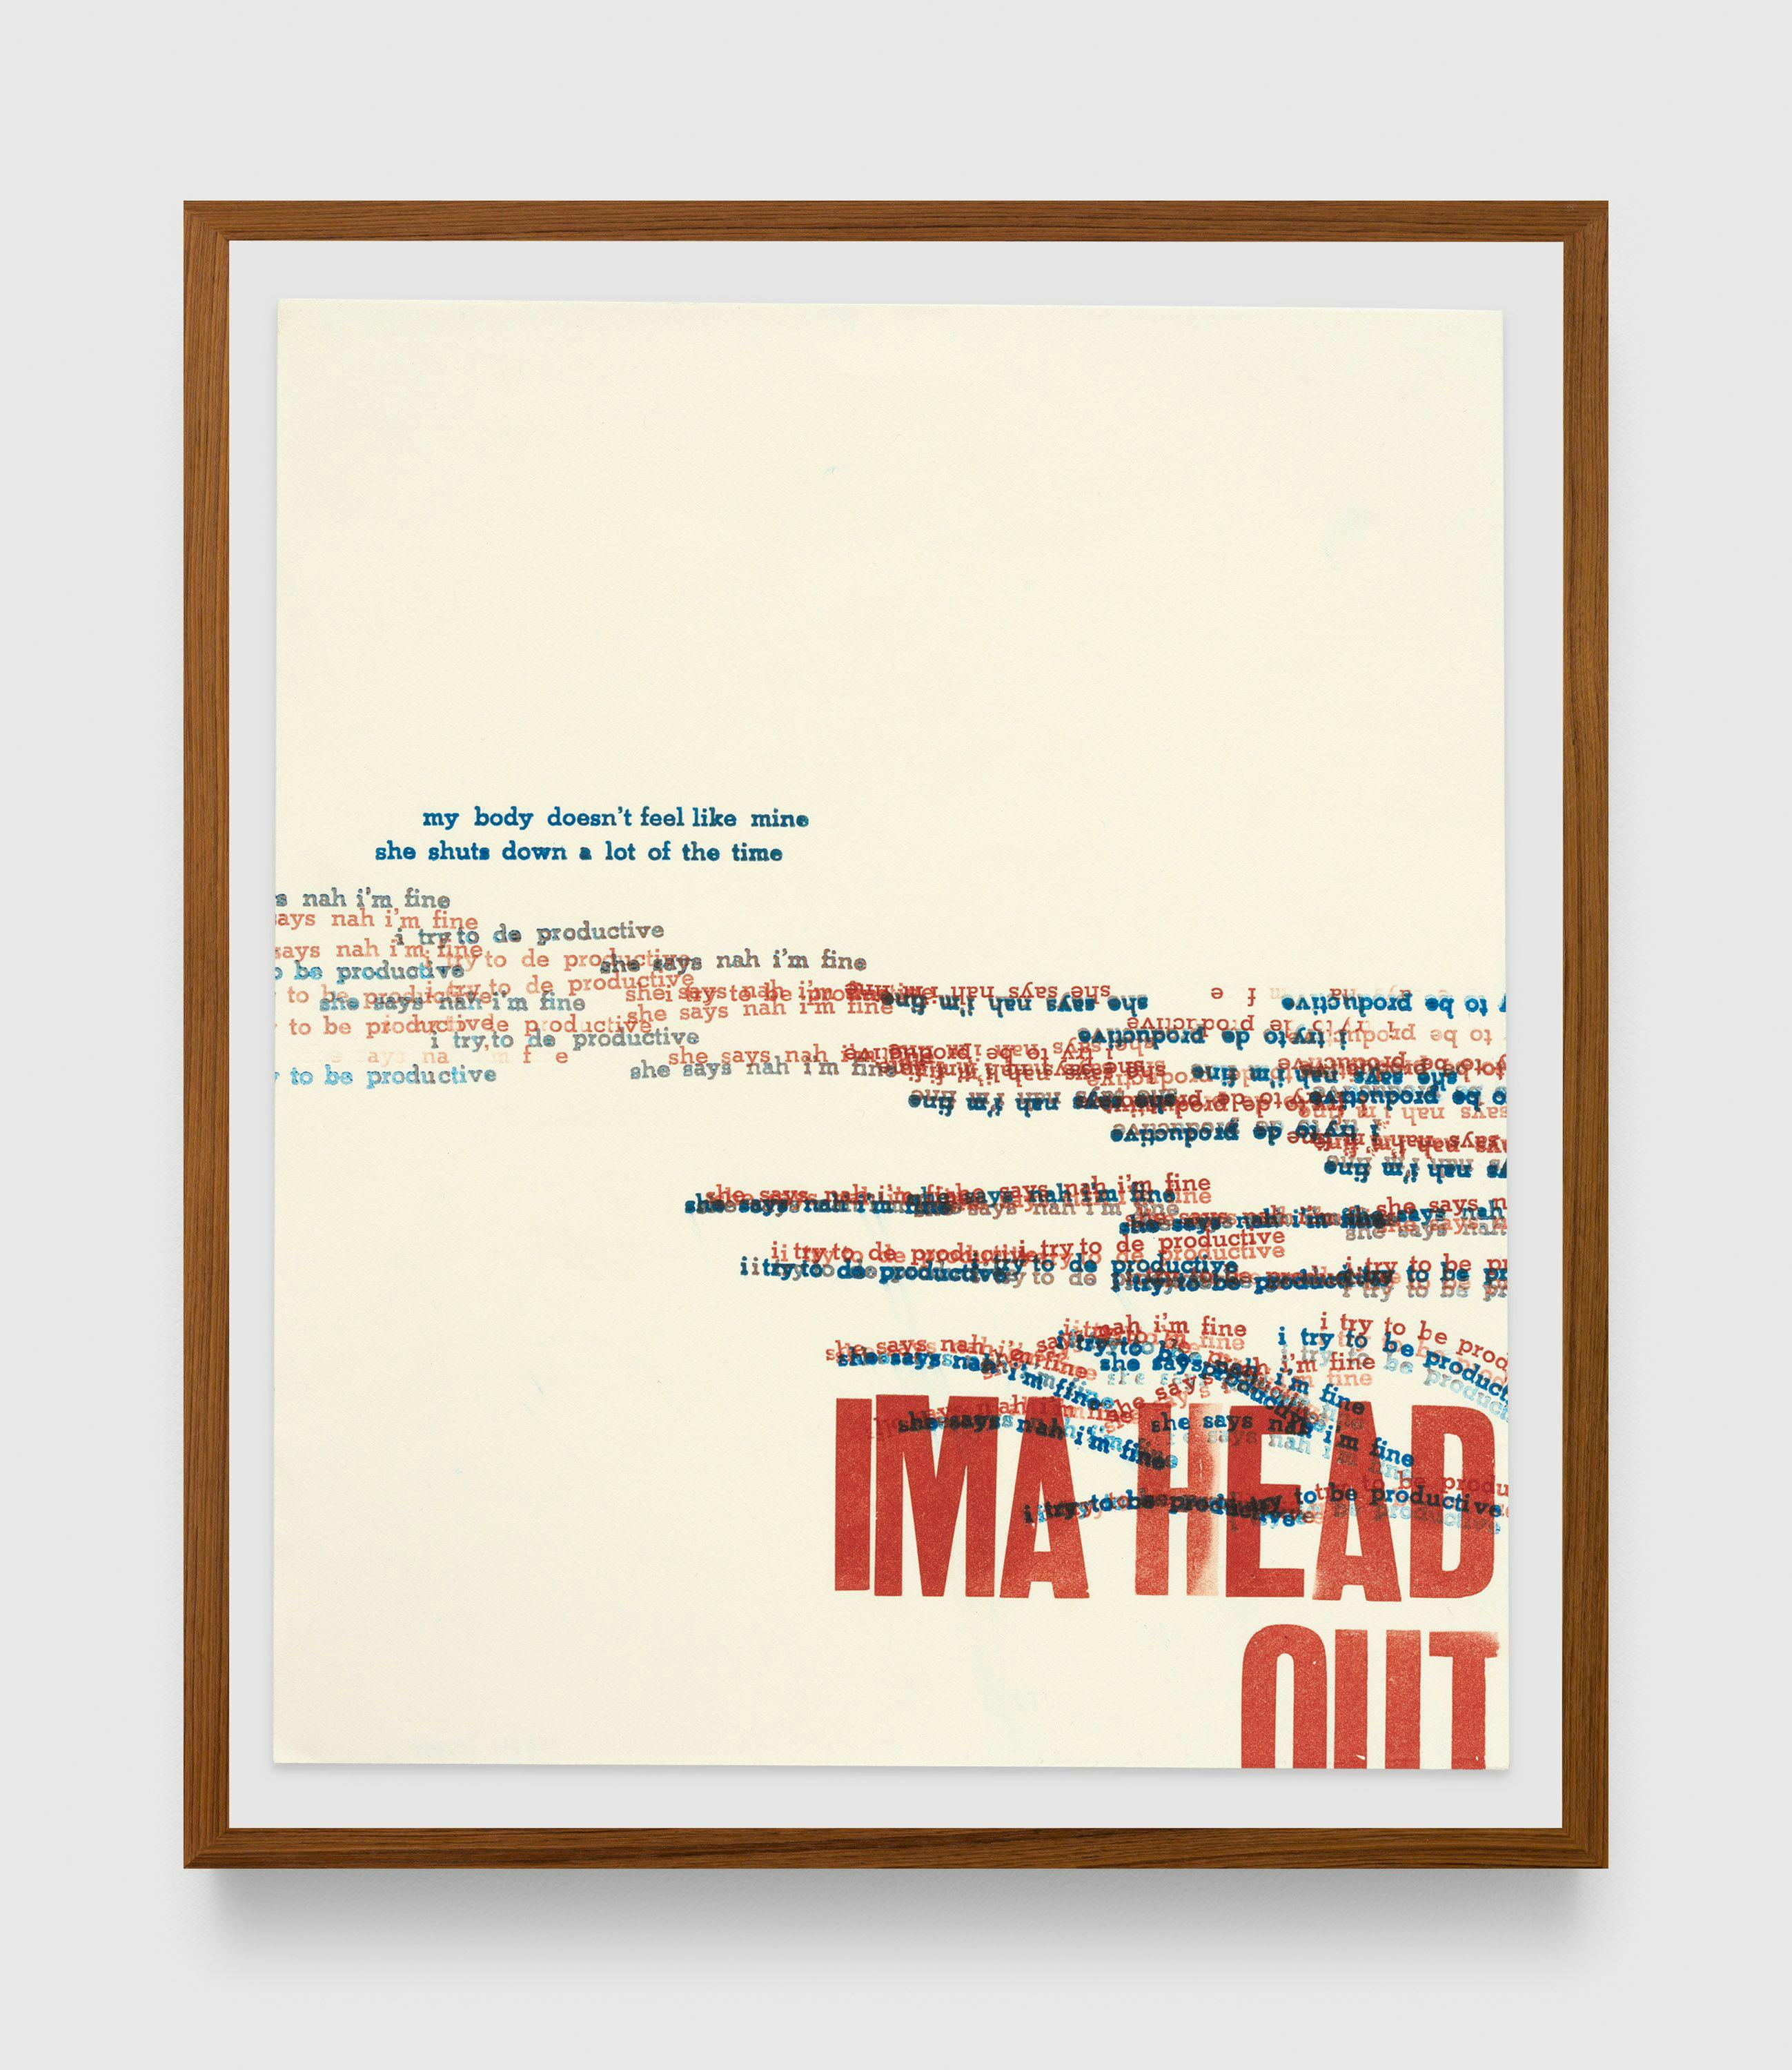 A print by Valerie Lozano, titled Concrete Poem, dated 2018.